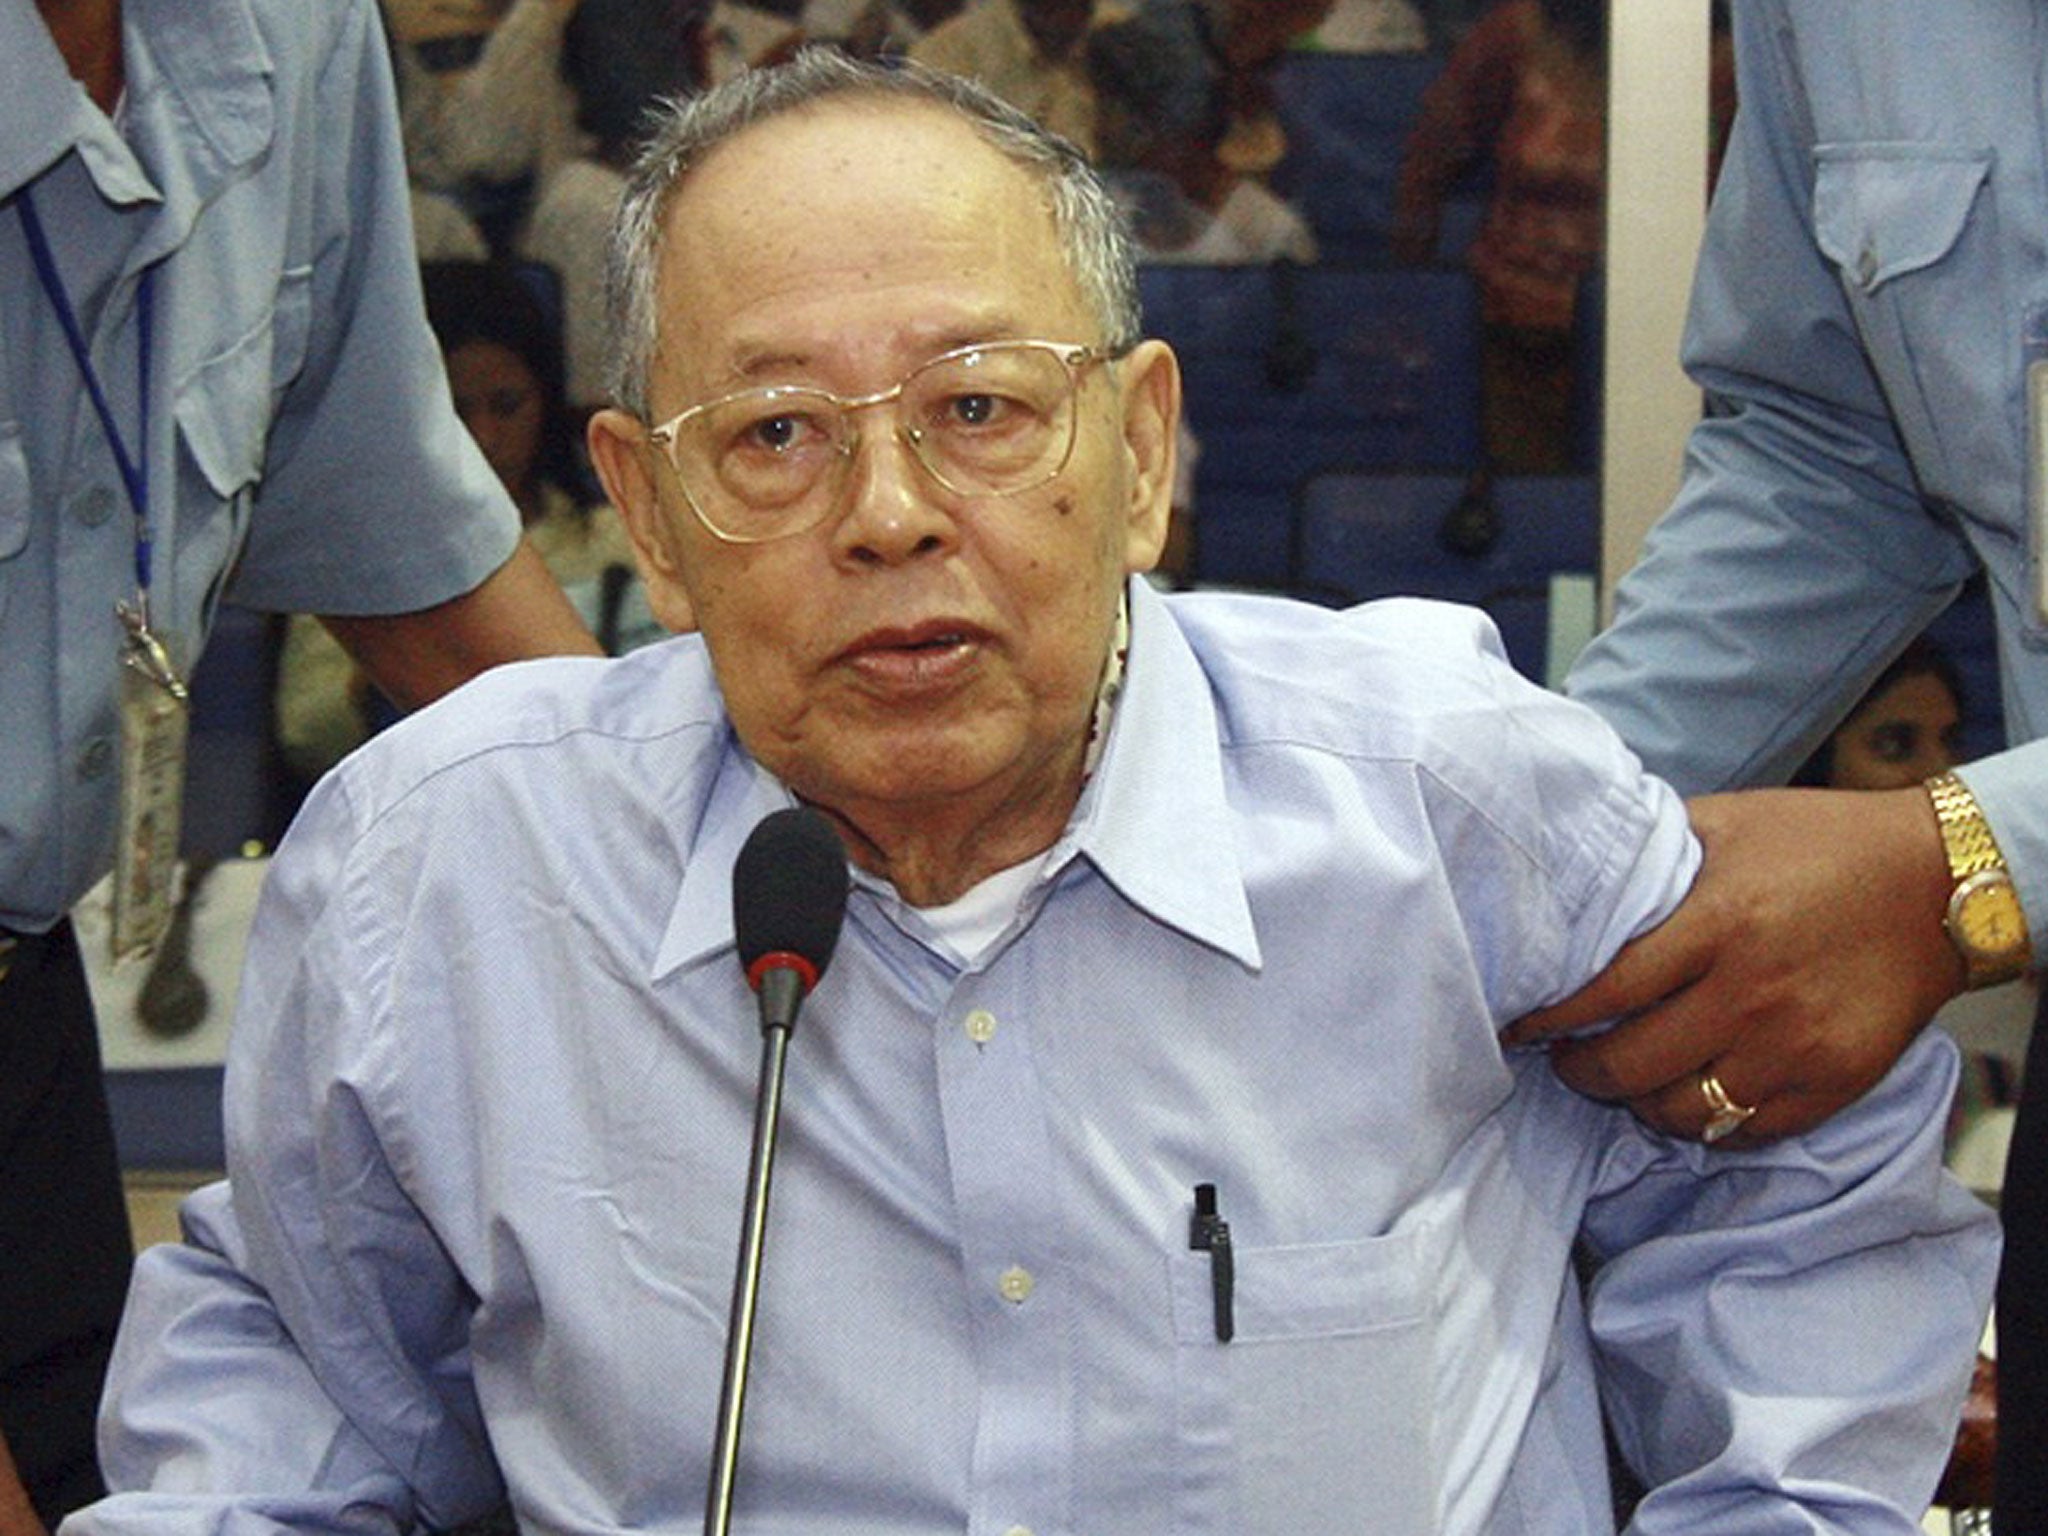 Sary is assisted by guards during hispre-trial hearing in Phnom Penh in 2008